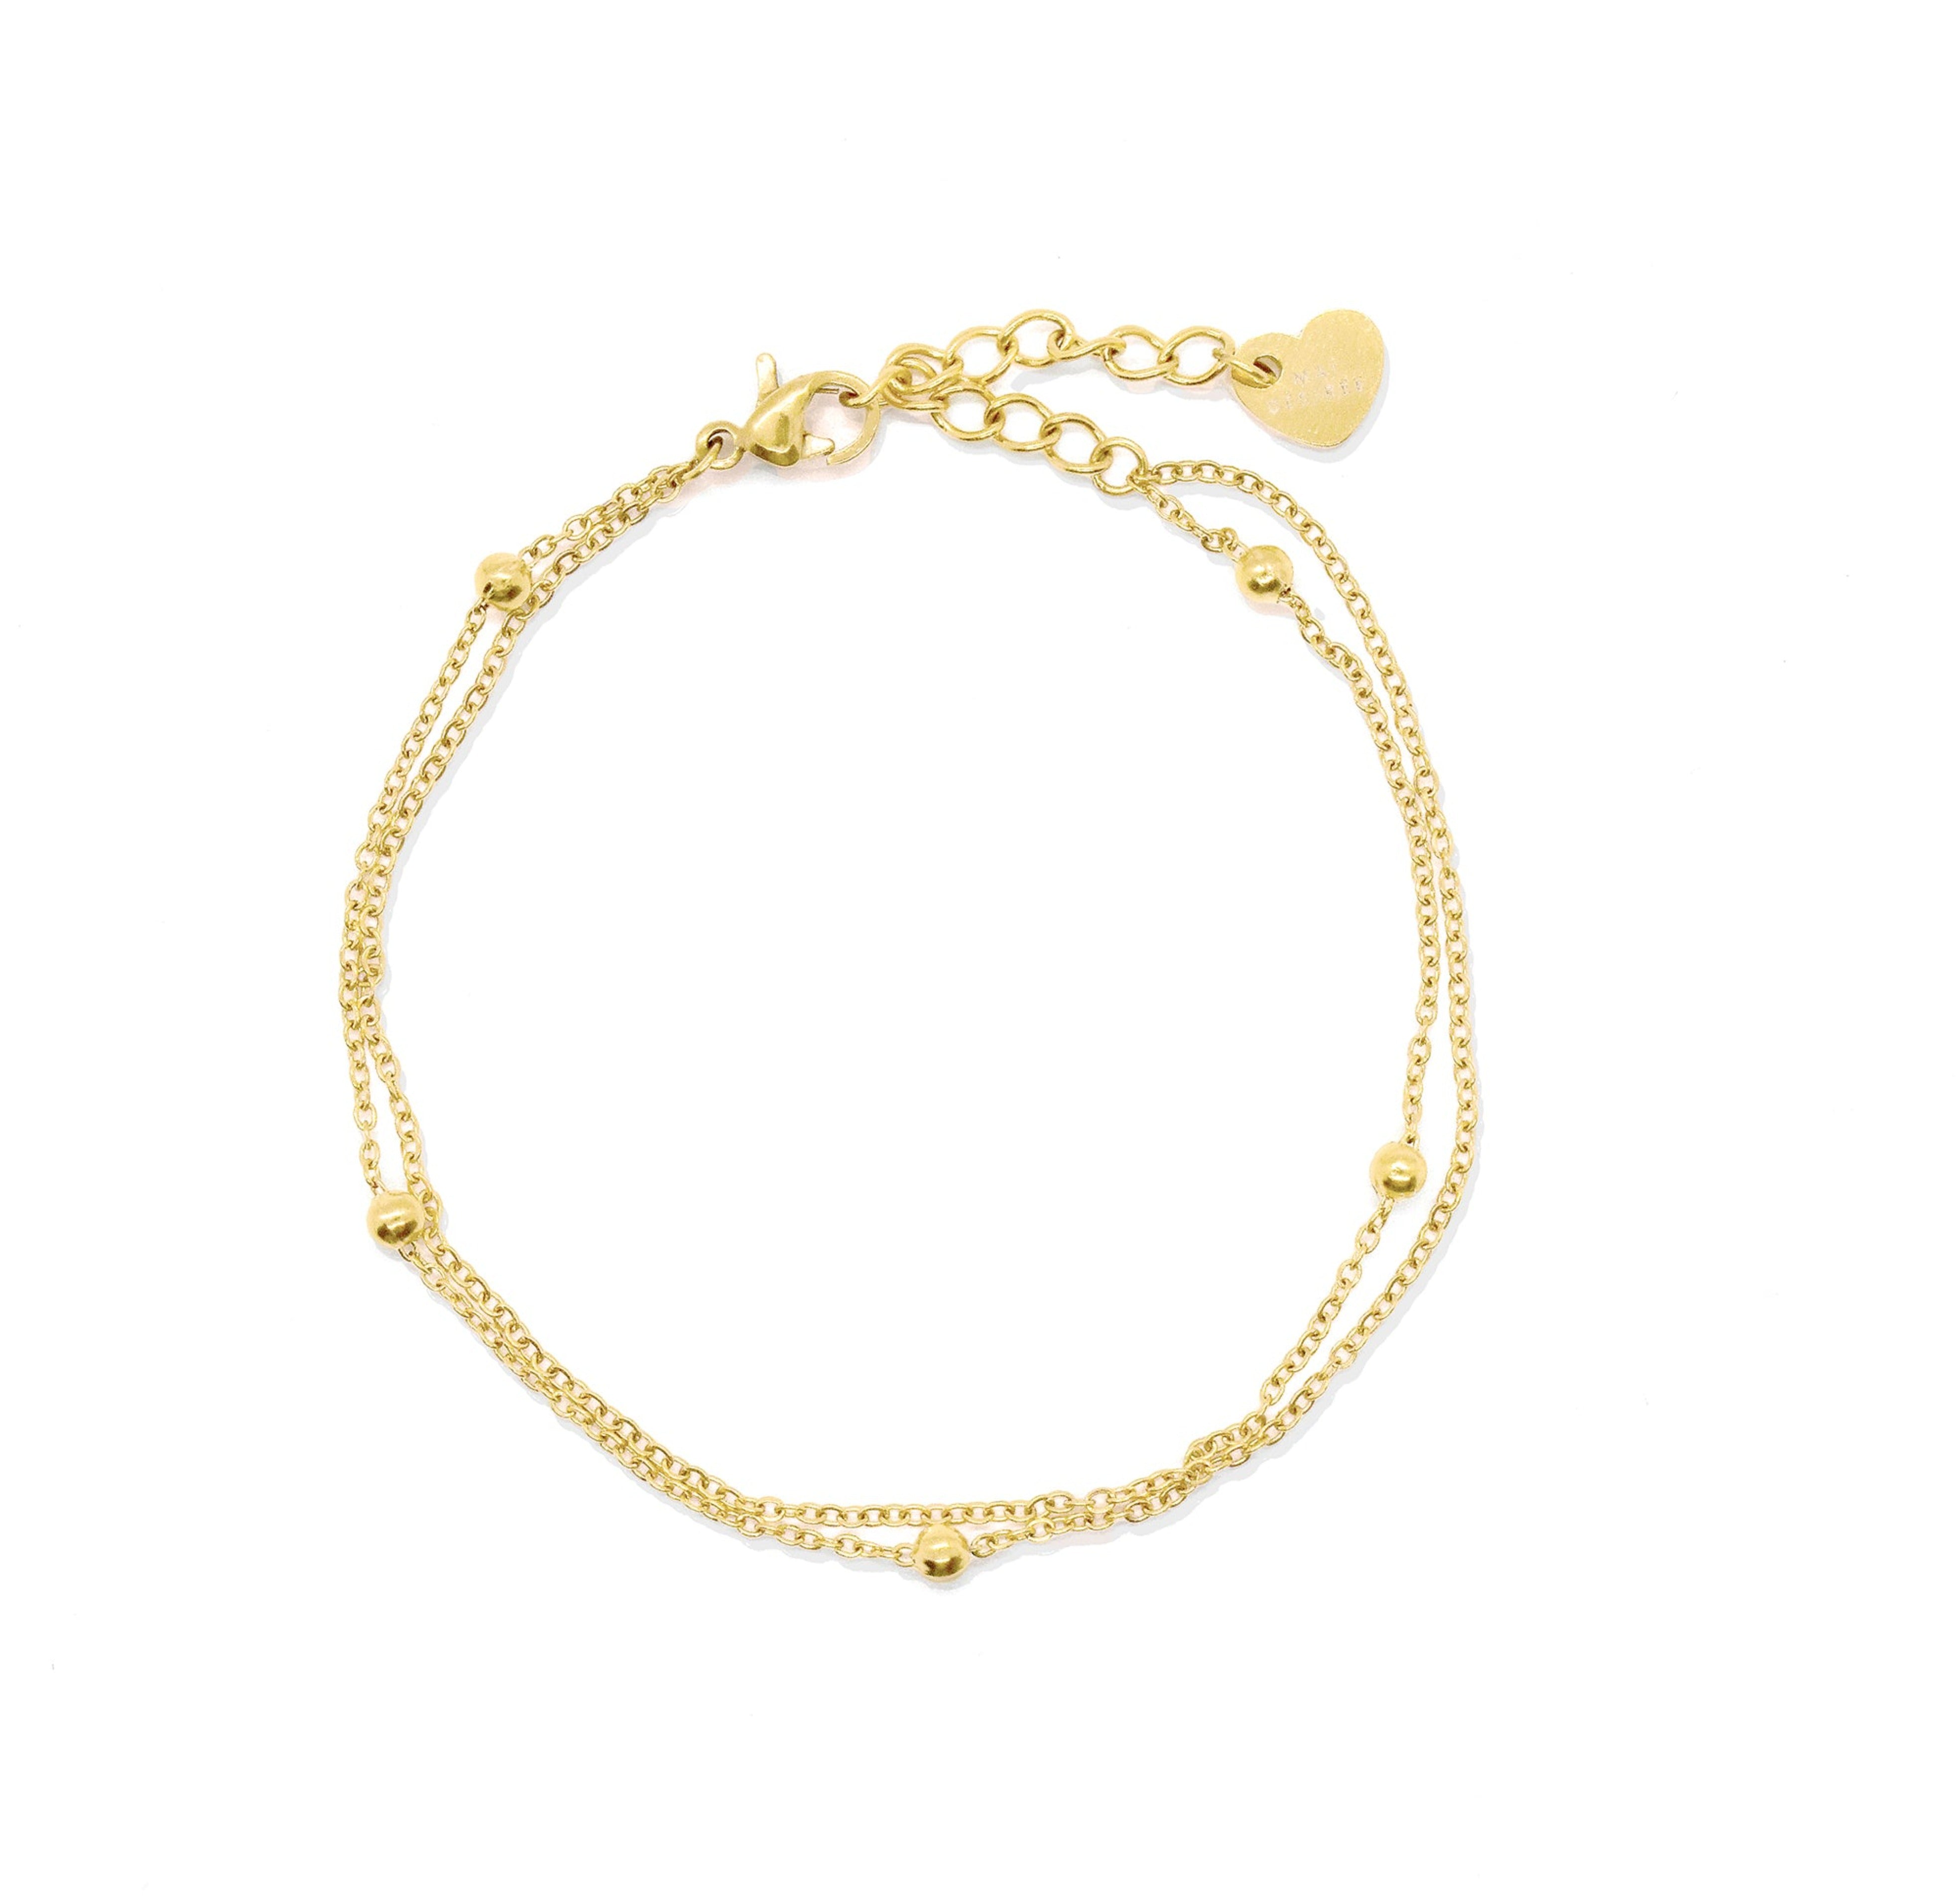 EVER DAINTY GOLD DOUBLE CHAIN BRACELET SAMPLE